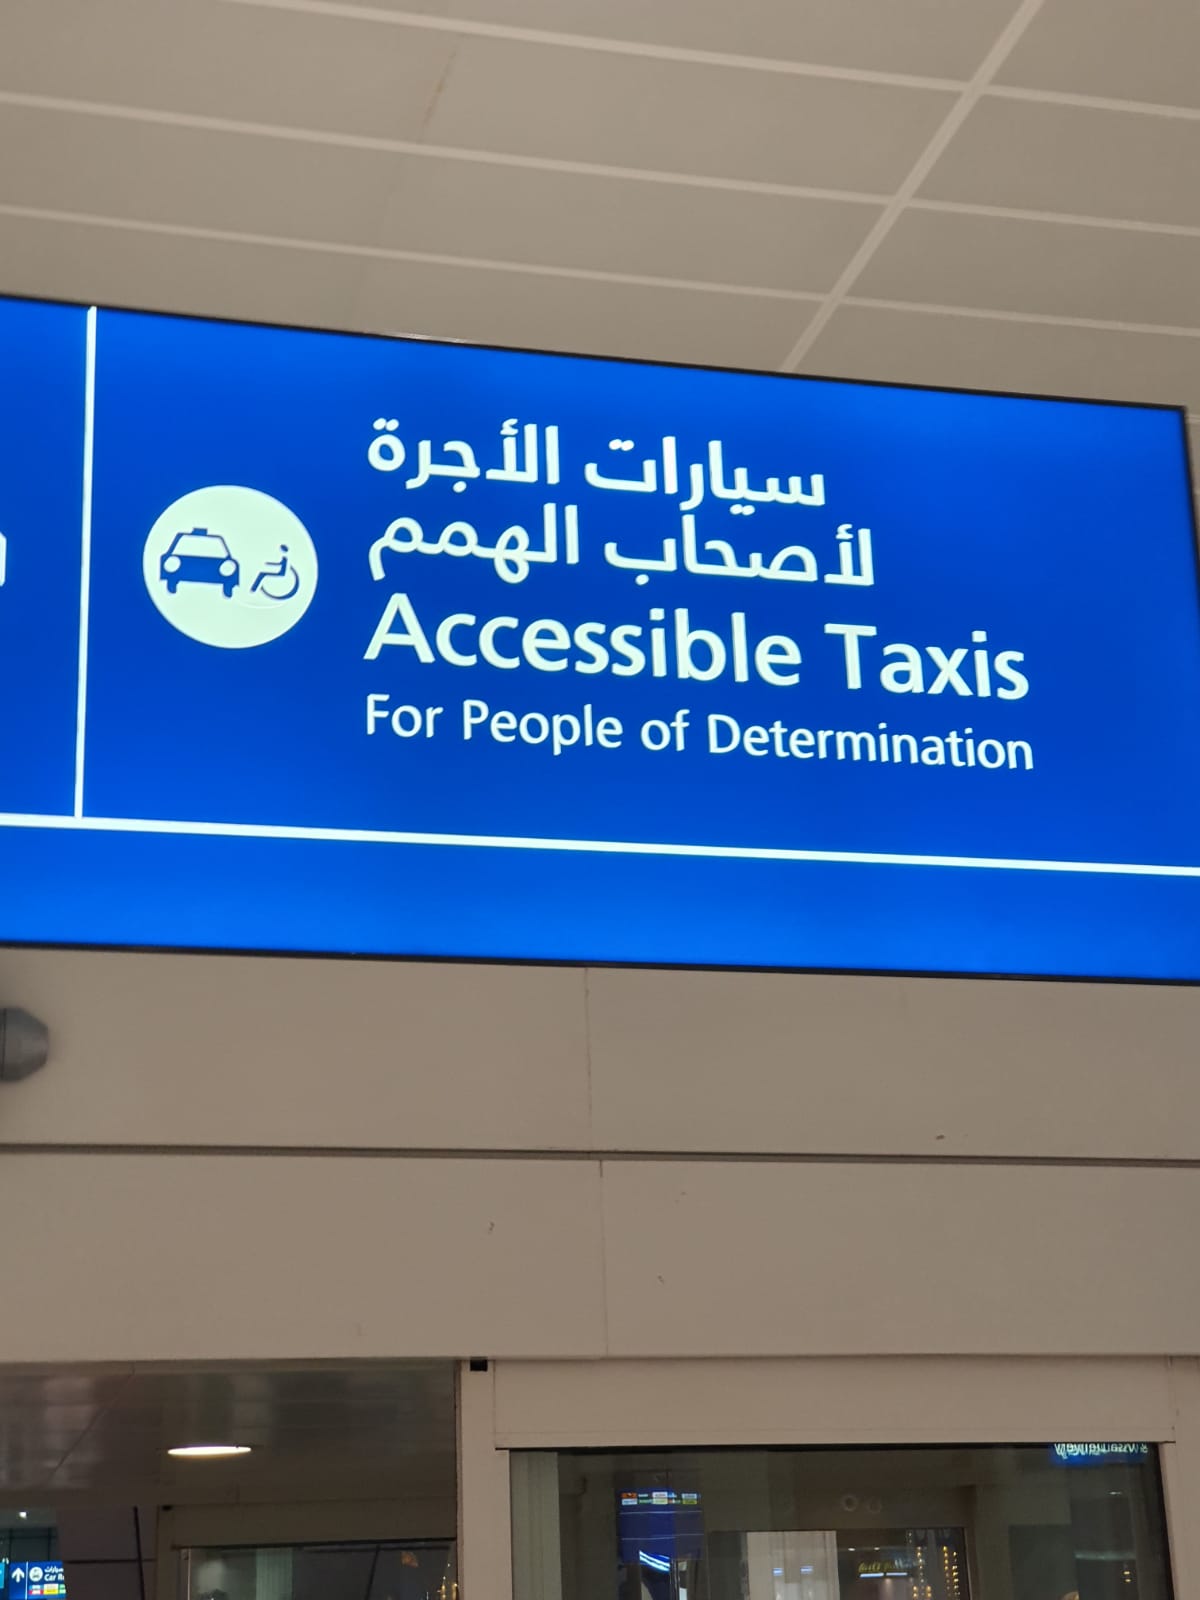 accessible taxis